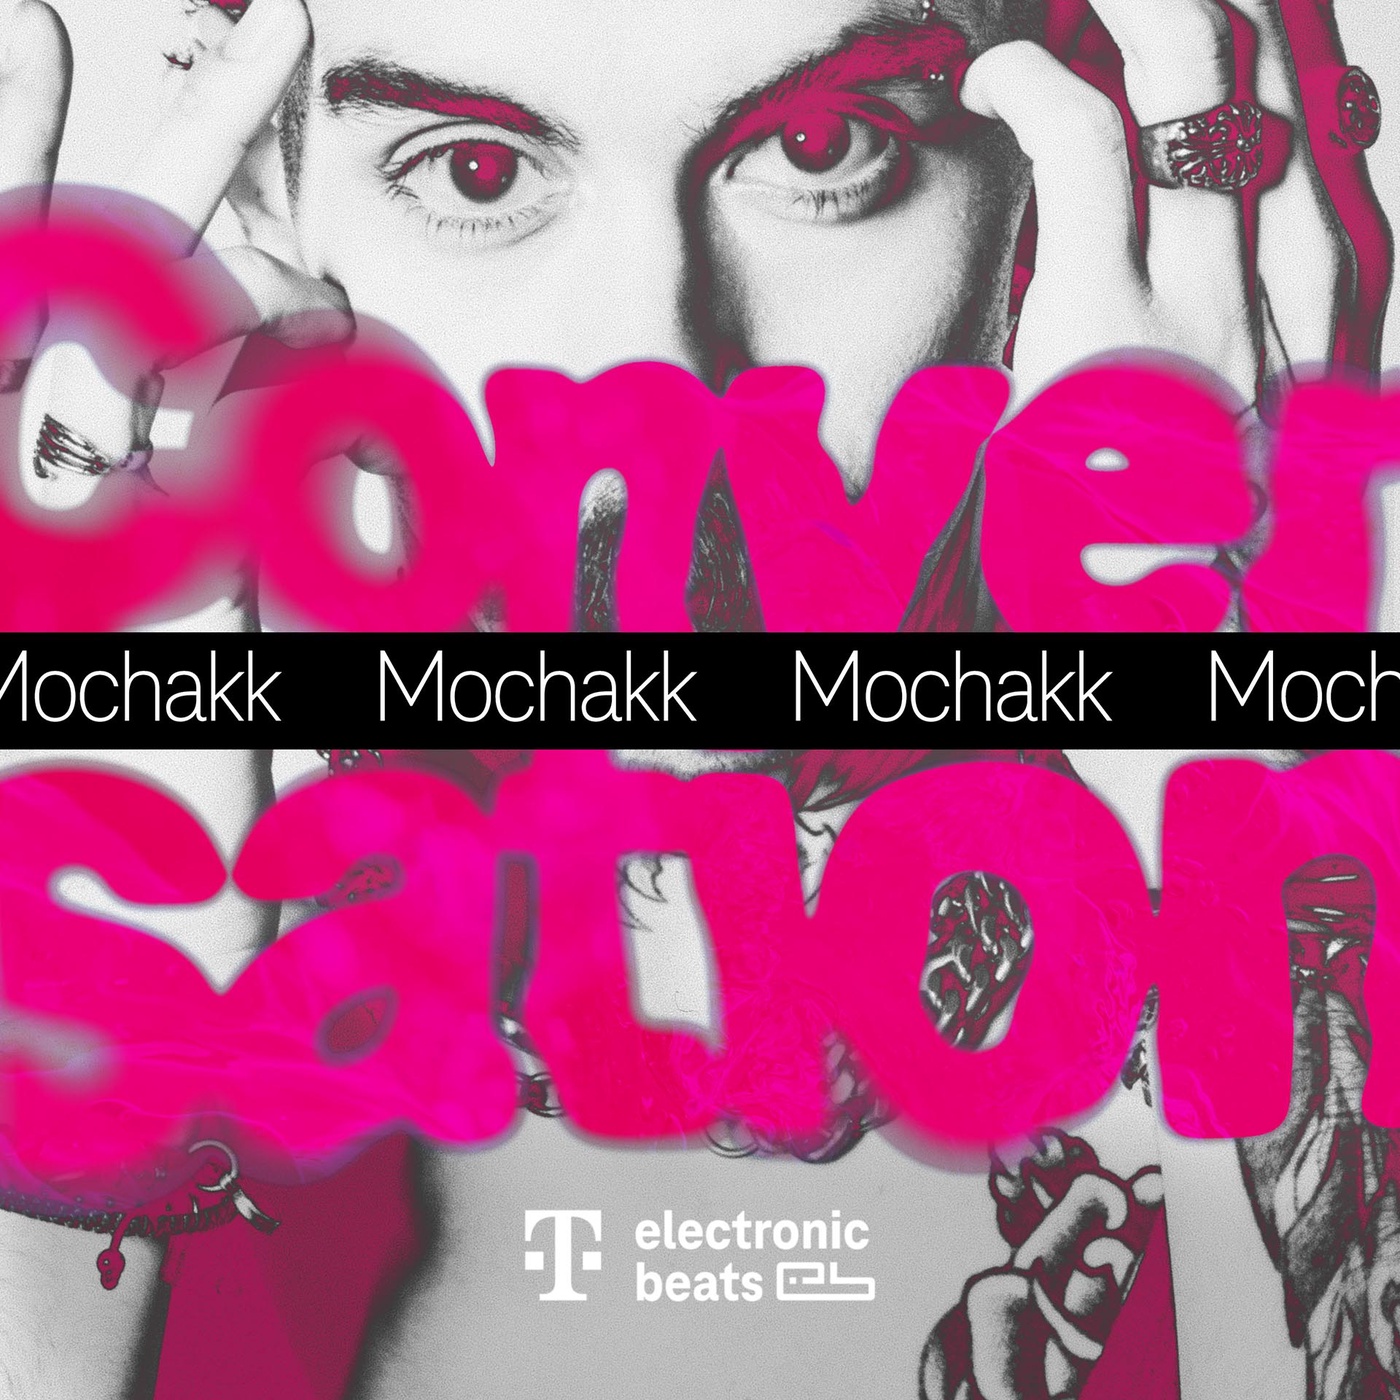 Mochakk in conversation: When Life is Poured into Music